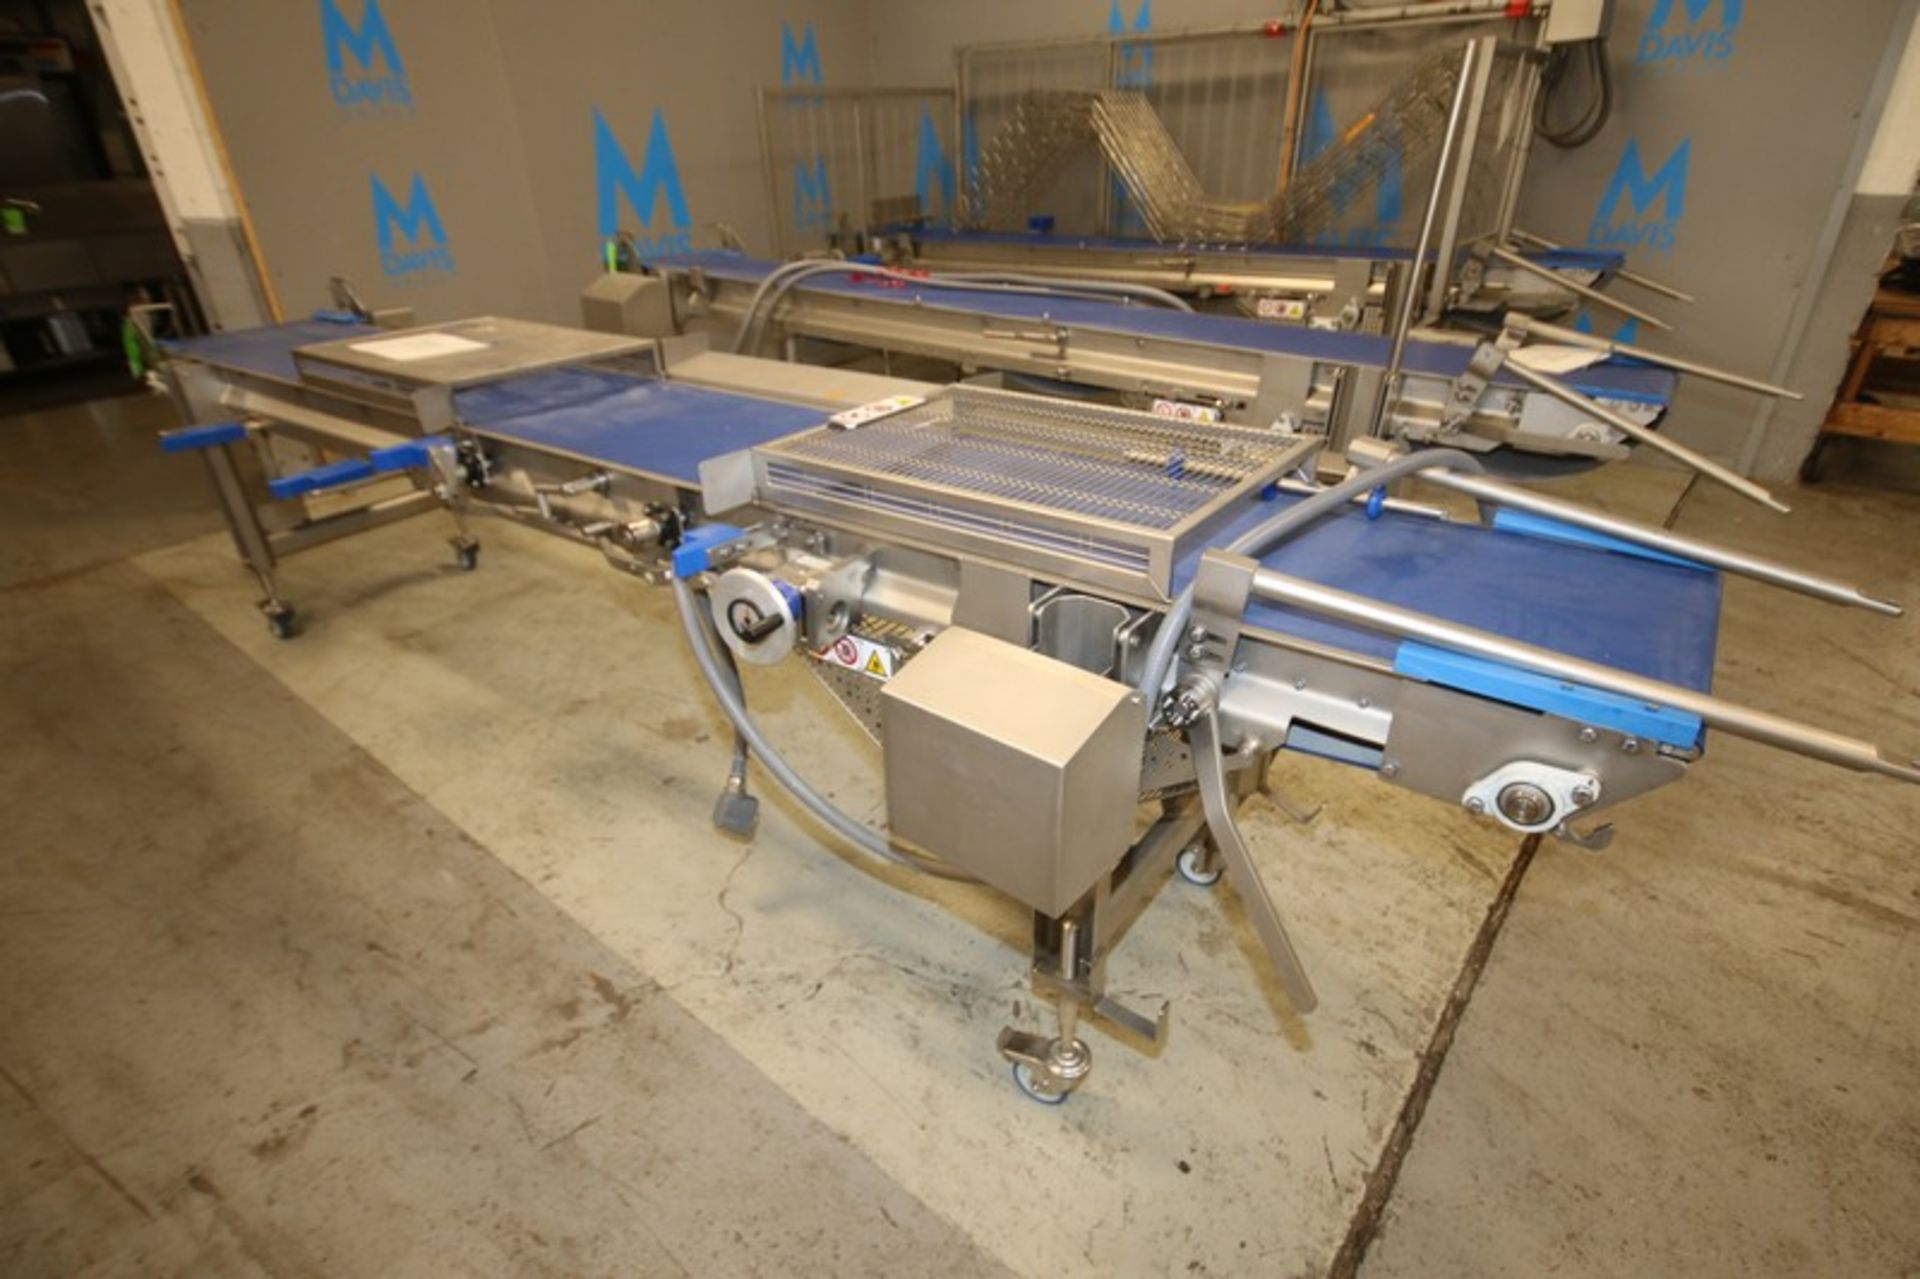 2019 Alimec Aprox. 159" L x 19 1/2" W x 34" H S/S Belt Conveyor, SN 813-55, with Bauer S/S Drive - Image 2 of 6